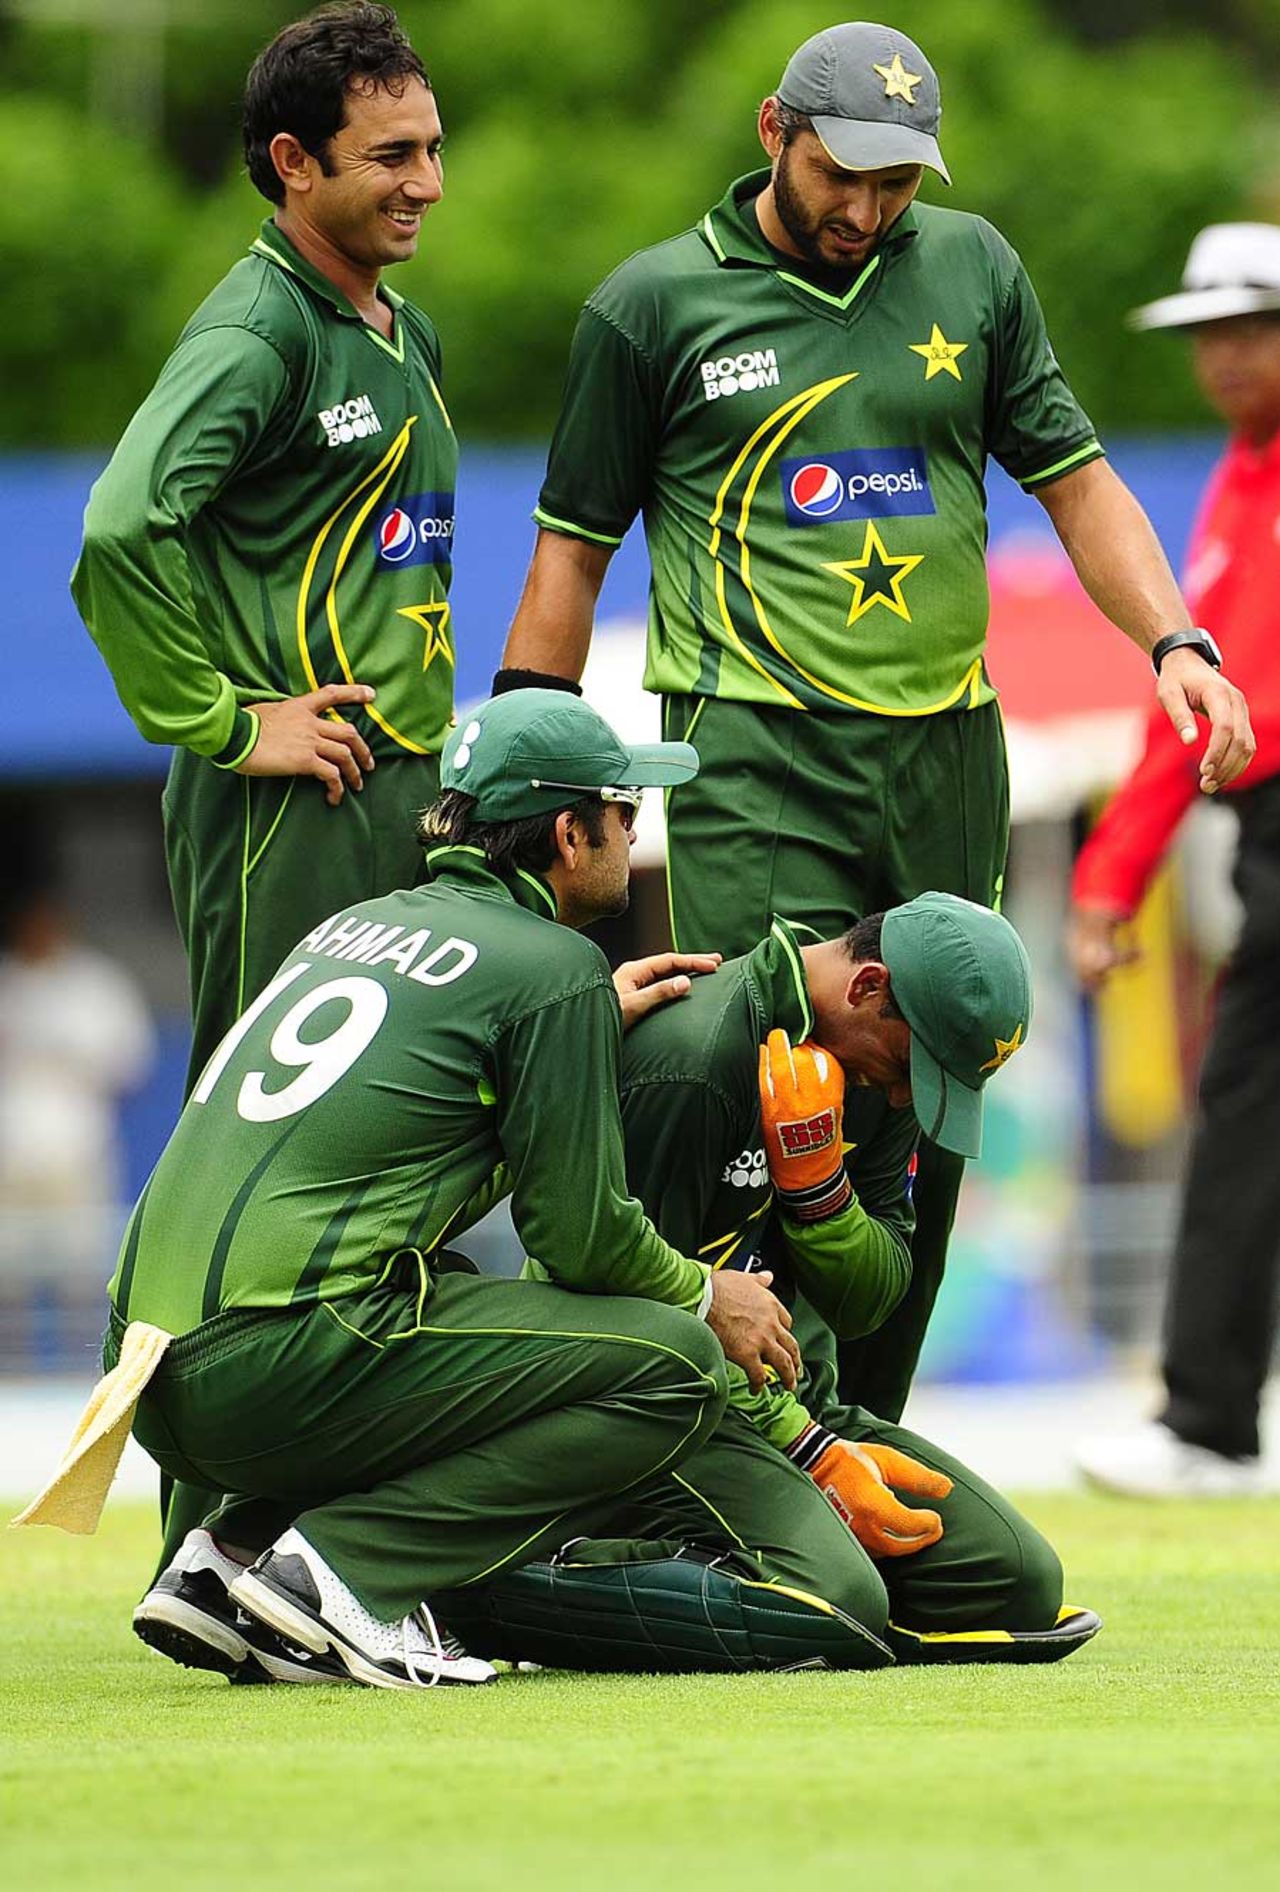 Wicketkeeper Mohammad Salman took a painful blow but was able to continue, West Indies v Pakistan, 3rd ODI, Barbados, April 28, 2011